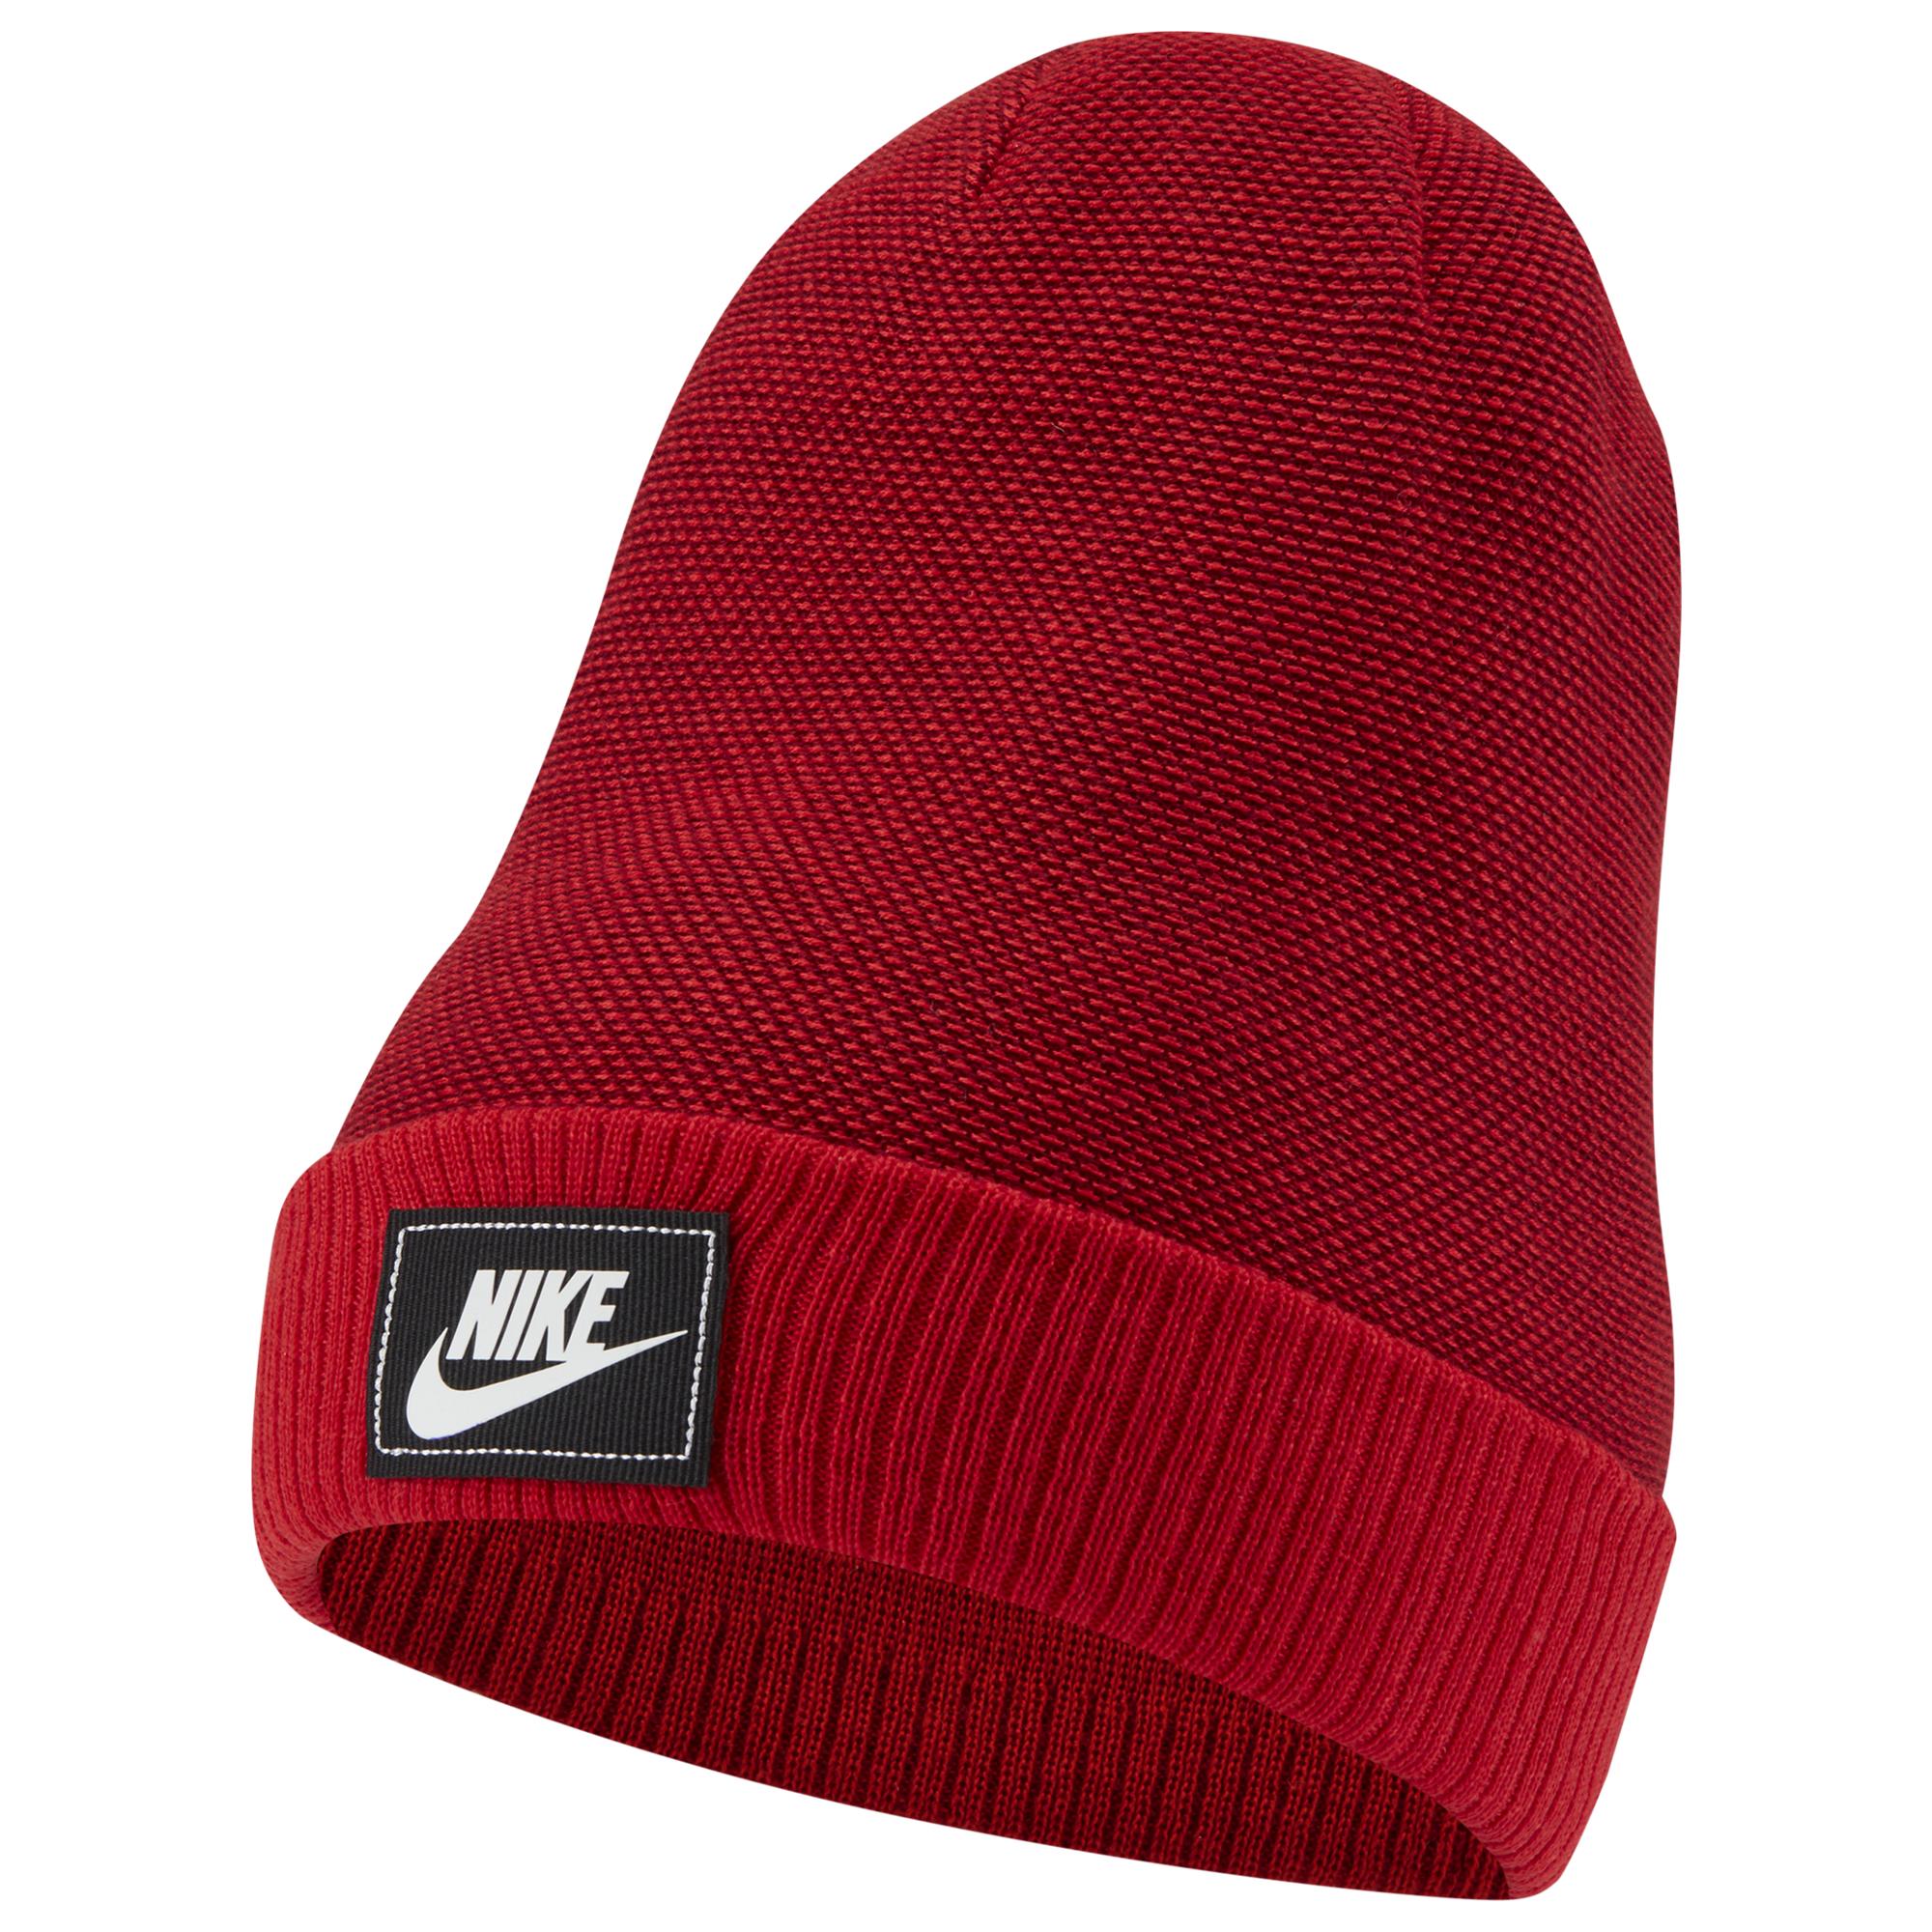 Nike Synthetic Futura Cuffed Beanie in Red/Black (Red) for Men - Lyst